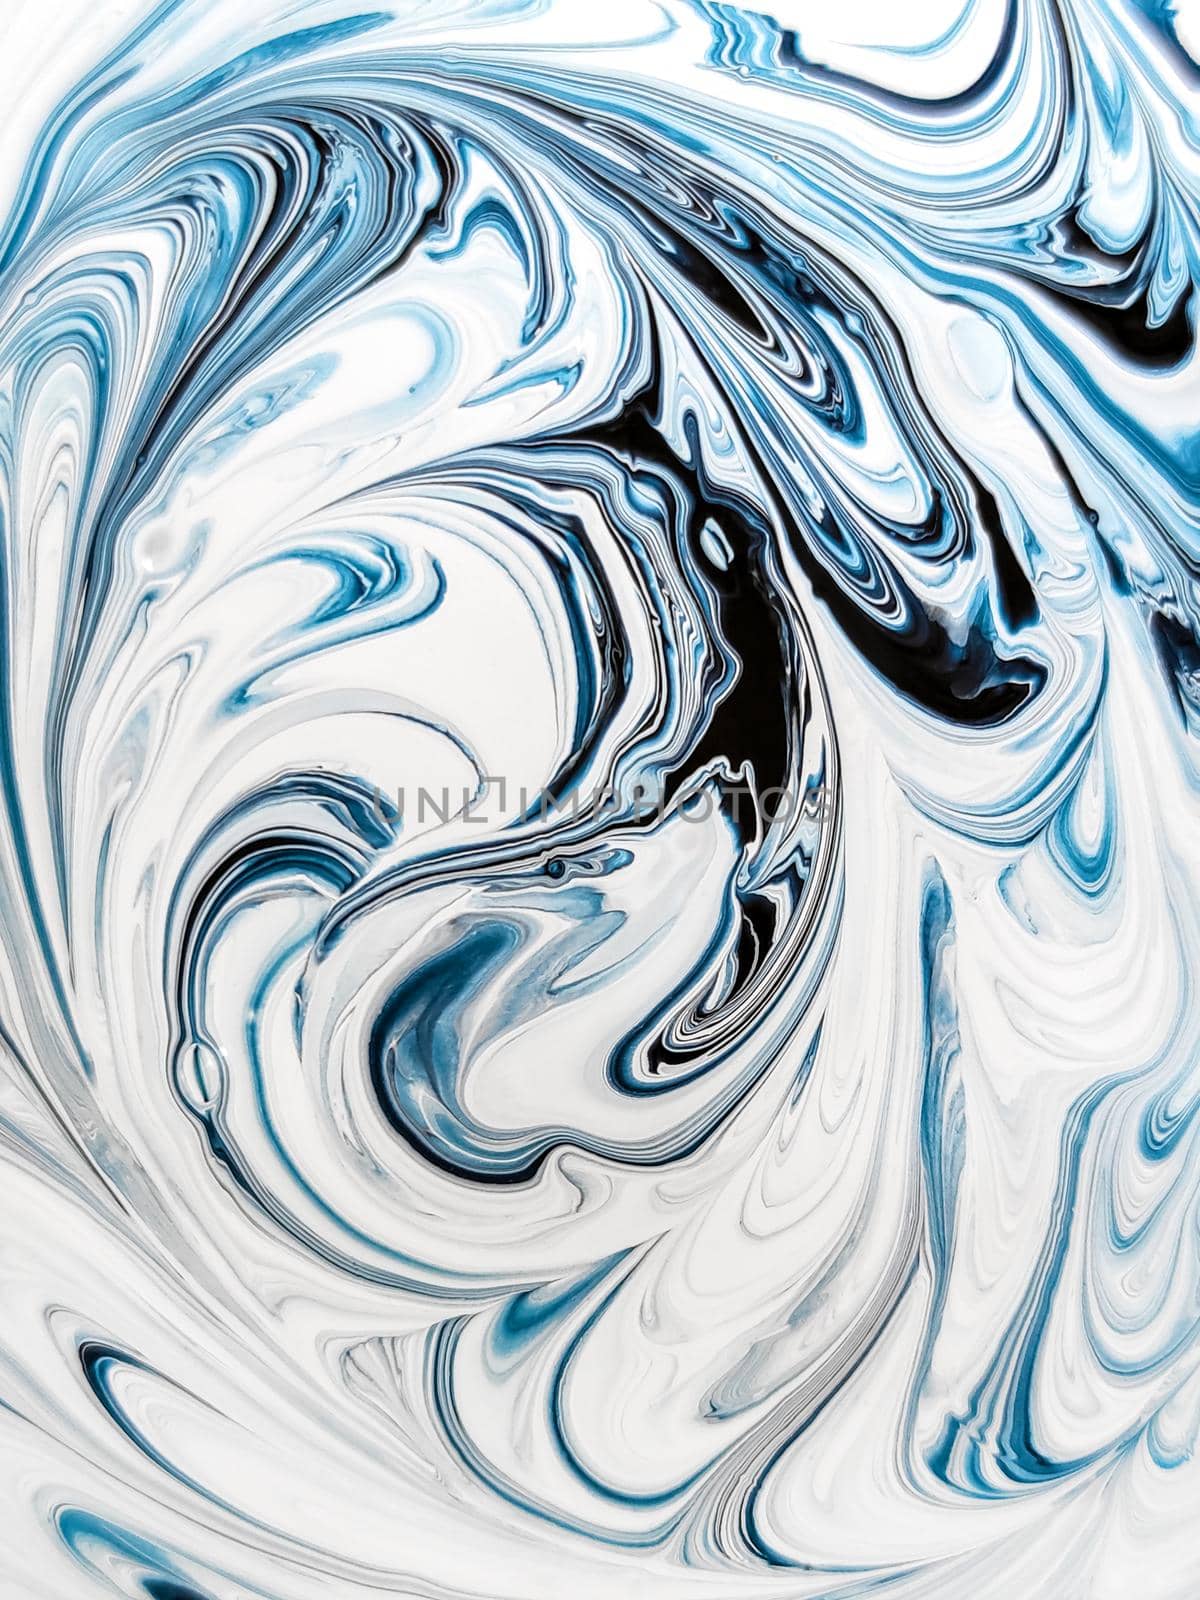 Background of an abstract blue-and-white drawing, multi-layer pattern of mixed paint, curved lines close up.